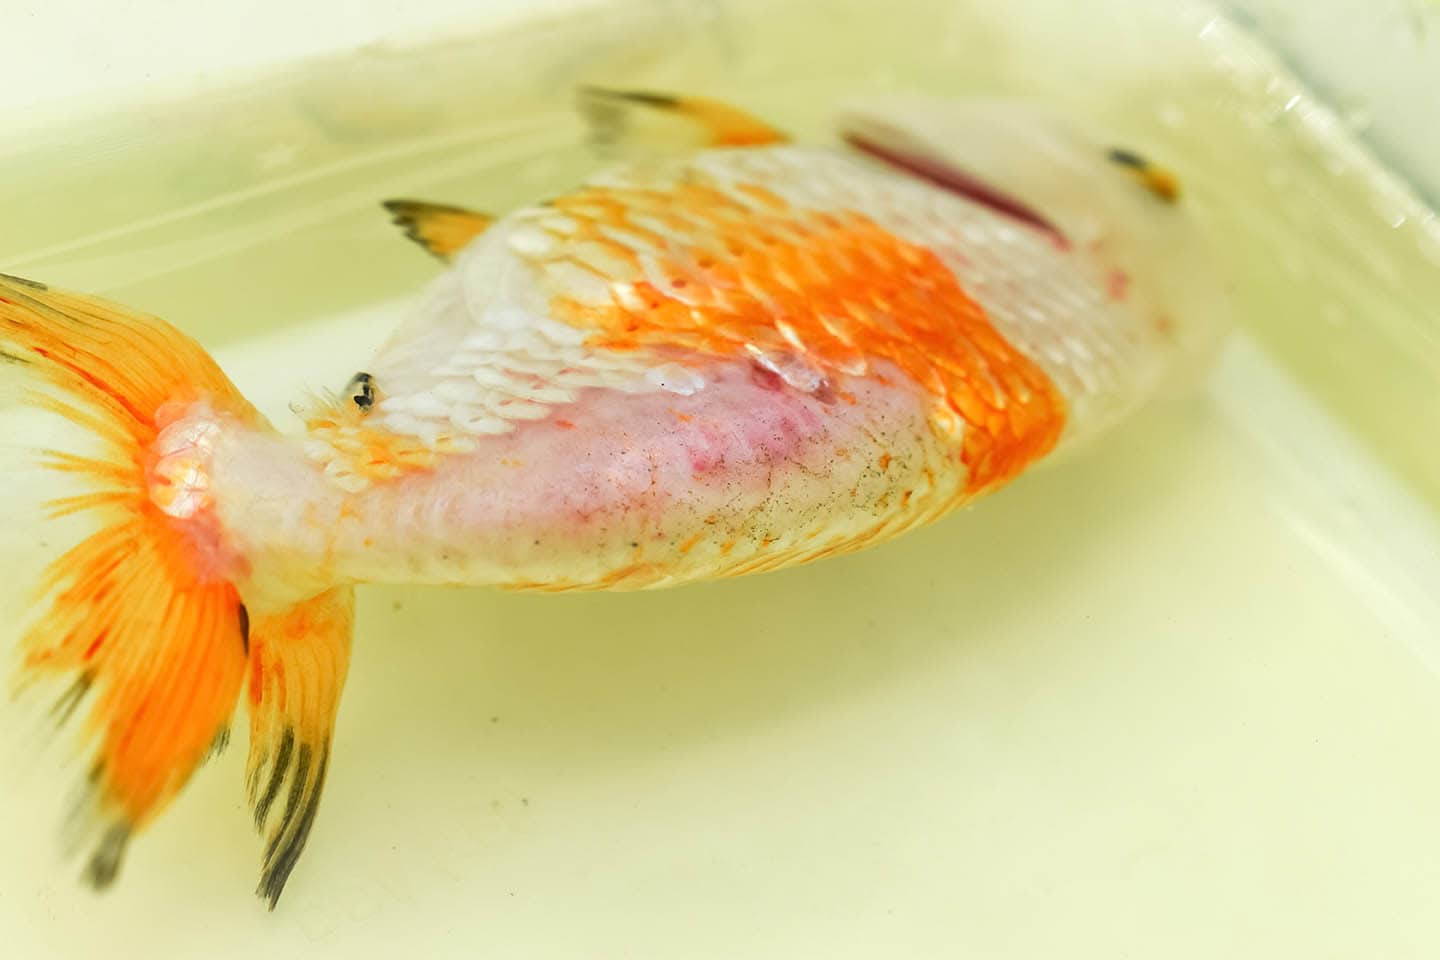 goldfish with ulcer